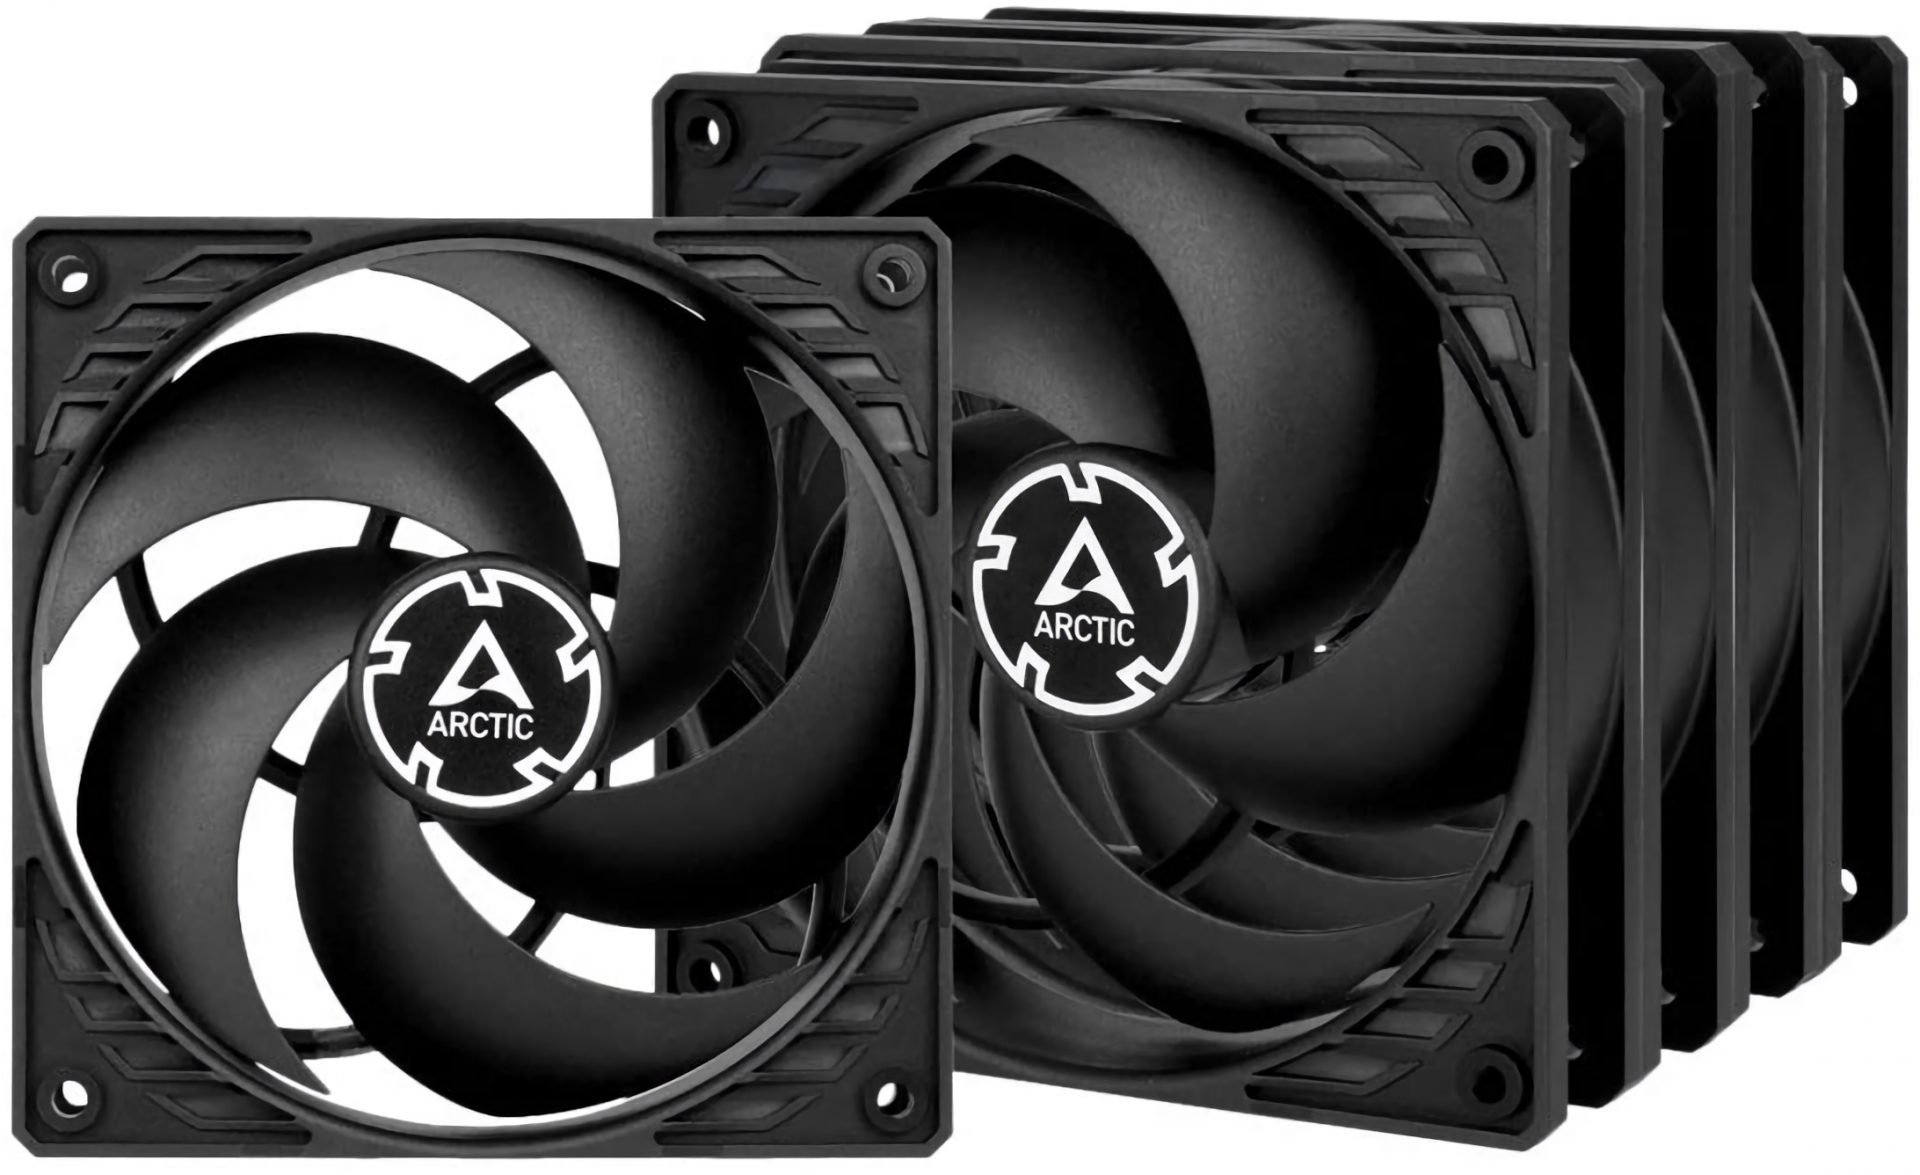 Arctic P12 PWM PST Case Fan - 120mm case fan with PWM control and PST cable - Pack of 5pcs - Arctic 2.35.64.00.075